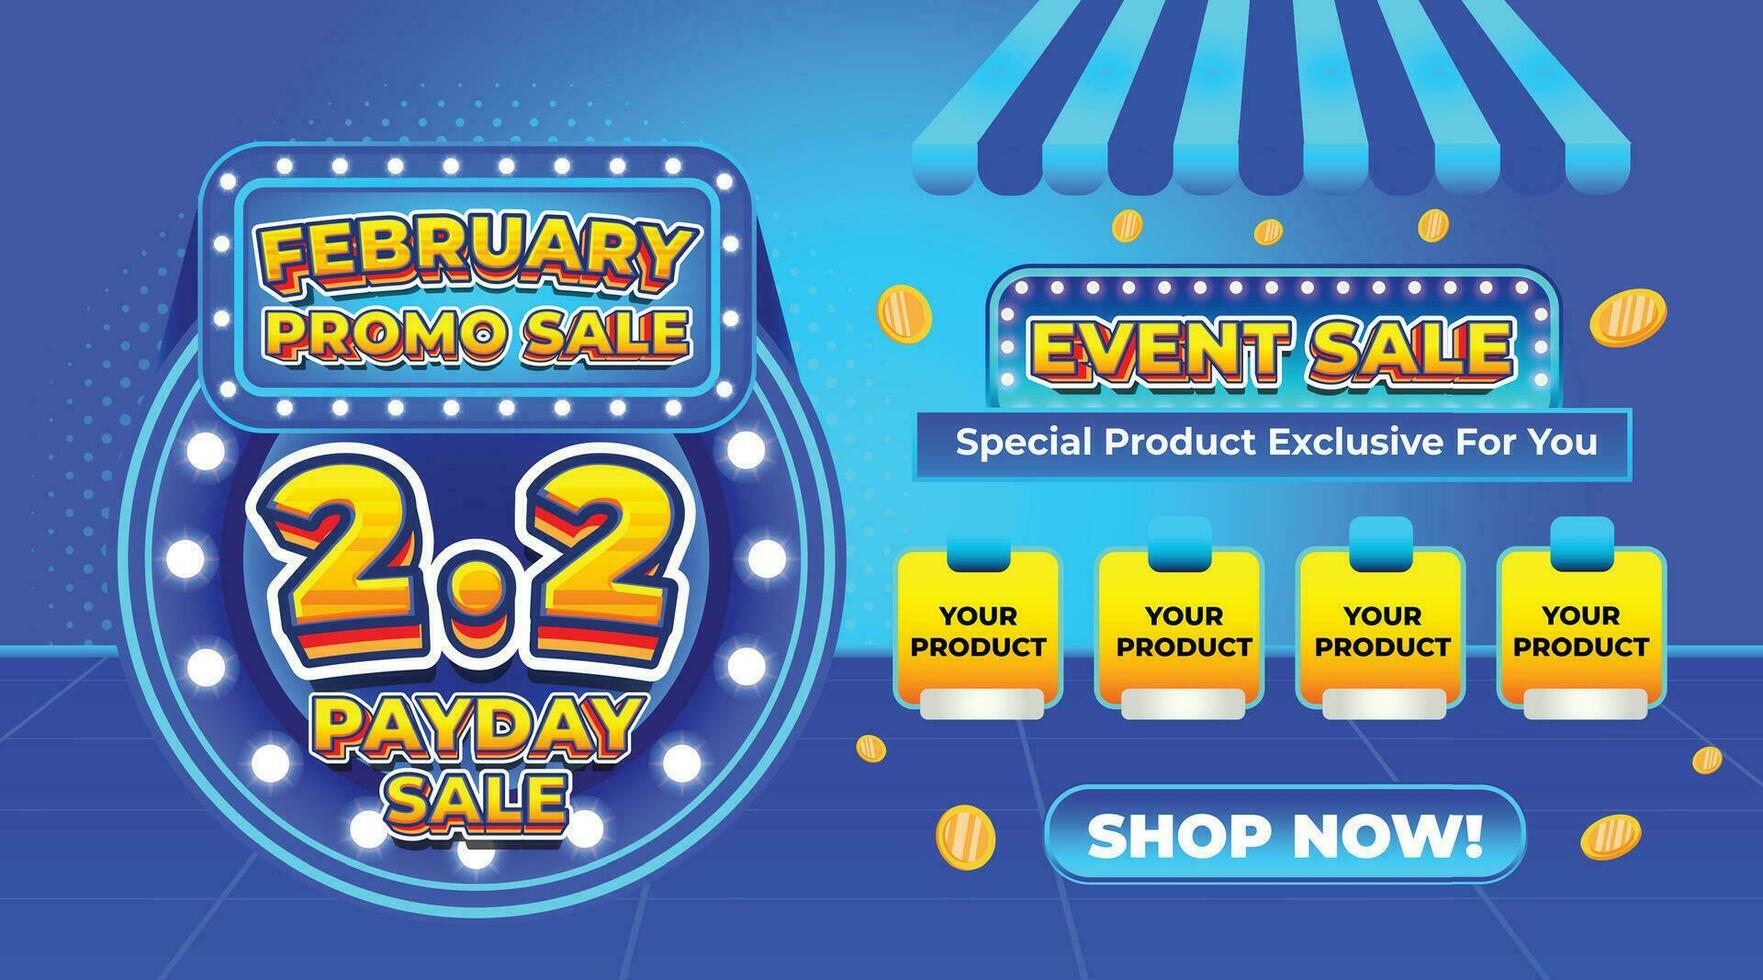 2 2 FEBRUARY PAYDAY SALE EVENT 3D CASHBACK DISCOUNT FLASH SALE SOCIAL MEDIA PROMO GIVEAWAY TEMPLATE BACKGROUND vector